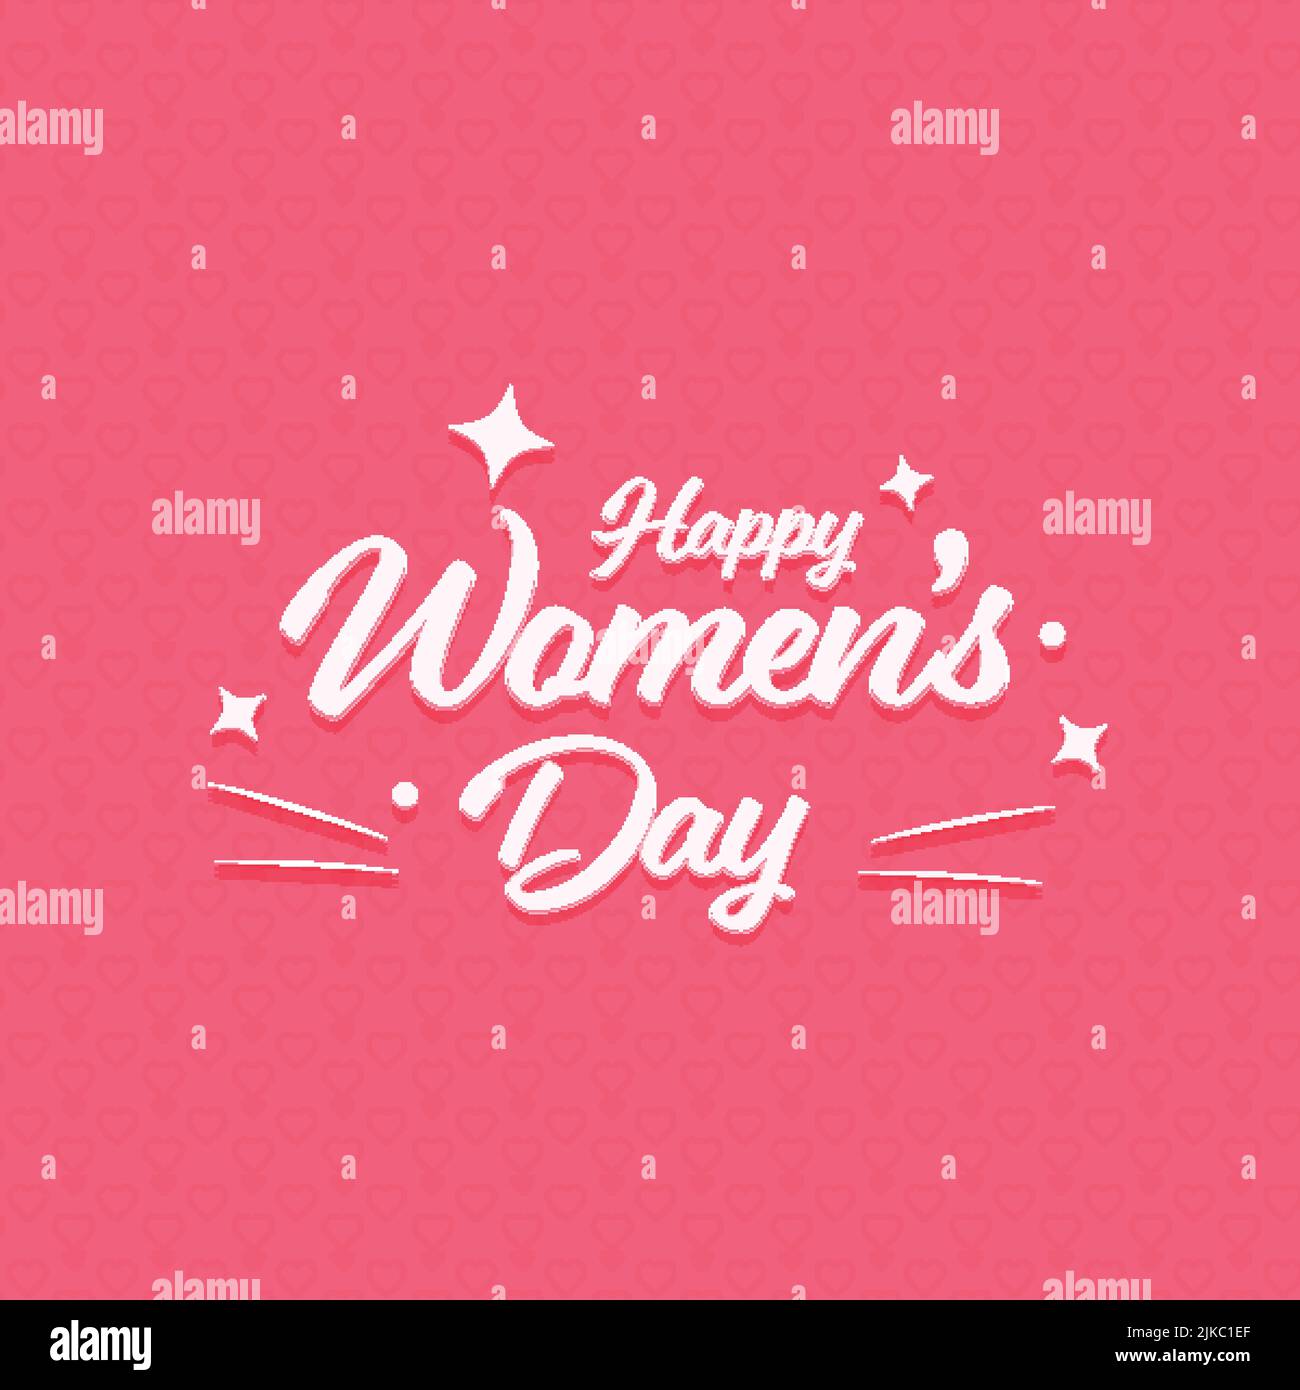 Happy Women's Day Font With Stars On Pink Hearts Pattern Background. Stock Vector